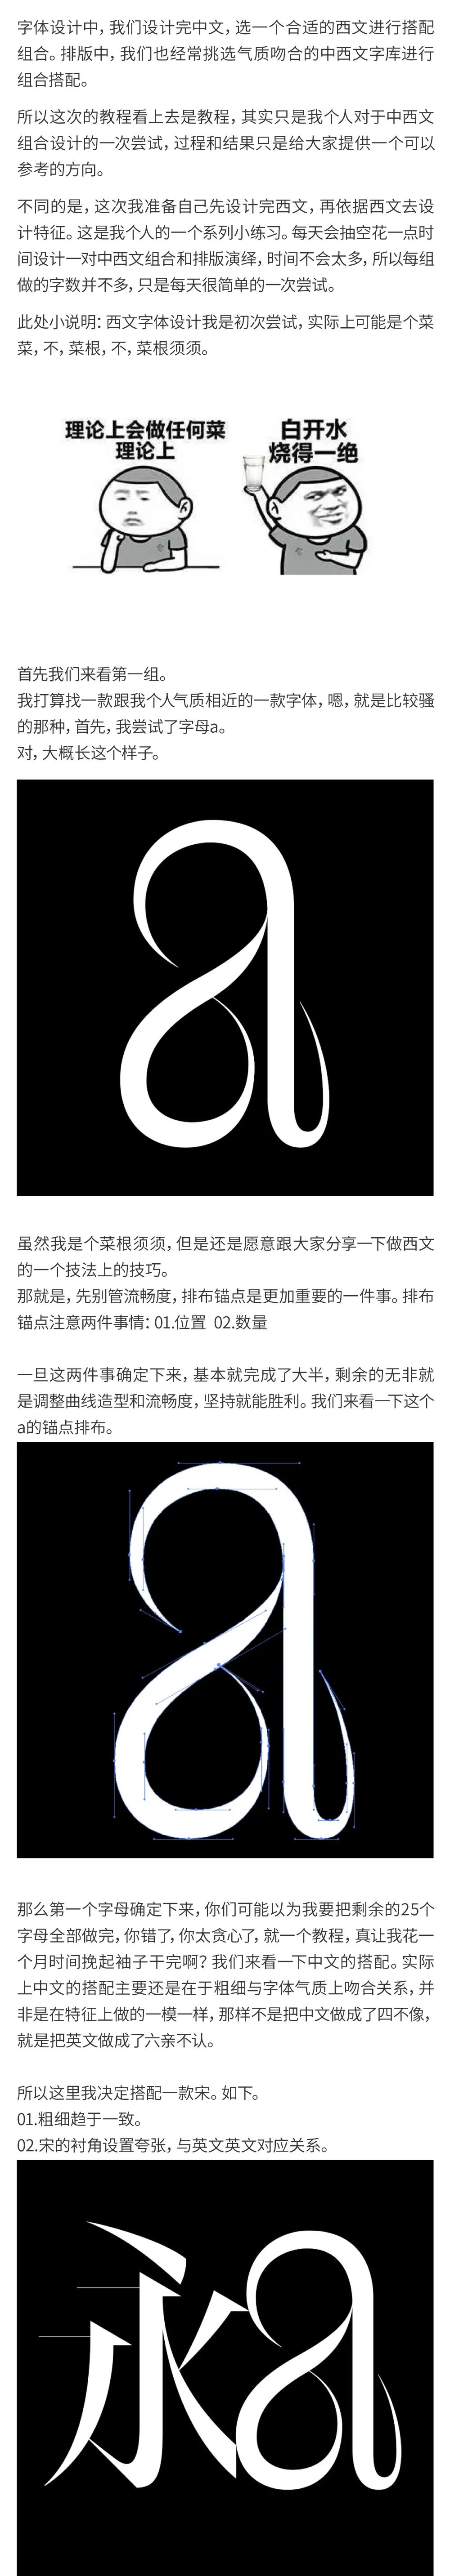 learn it! A tutorial on Chinese and English font adaptation